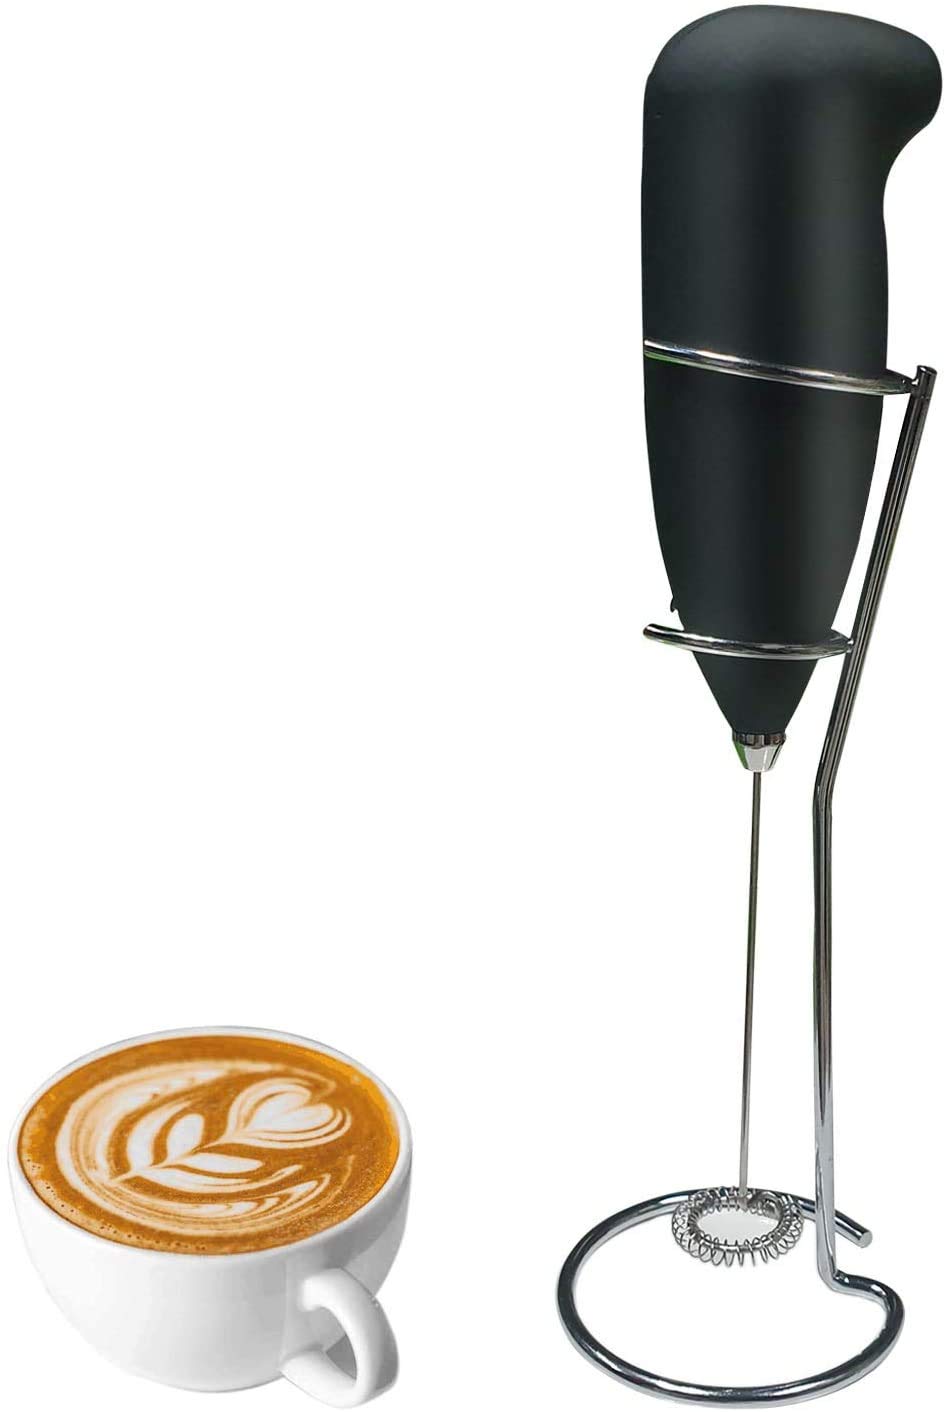 Milk Frother Handheld Foam Maker for Lattes, Coffee